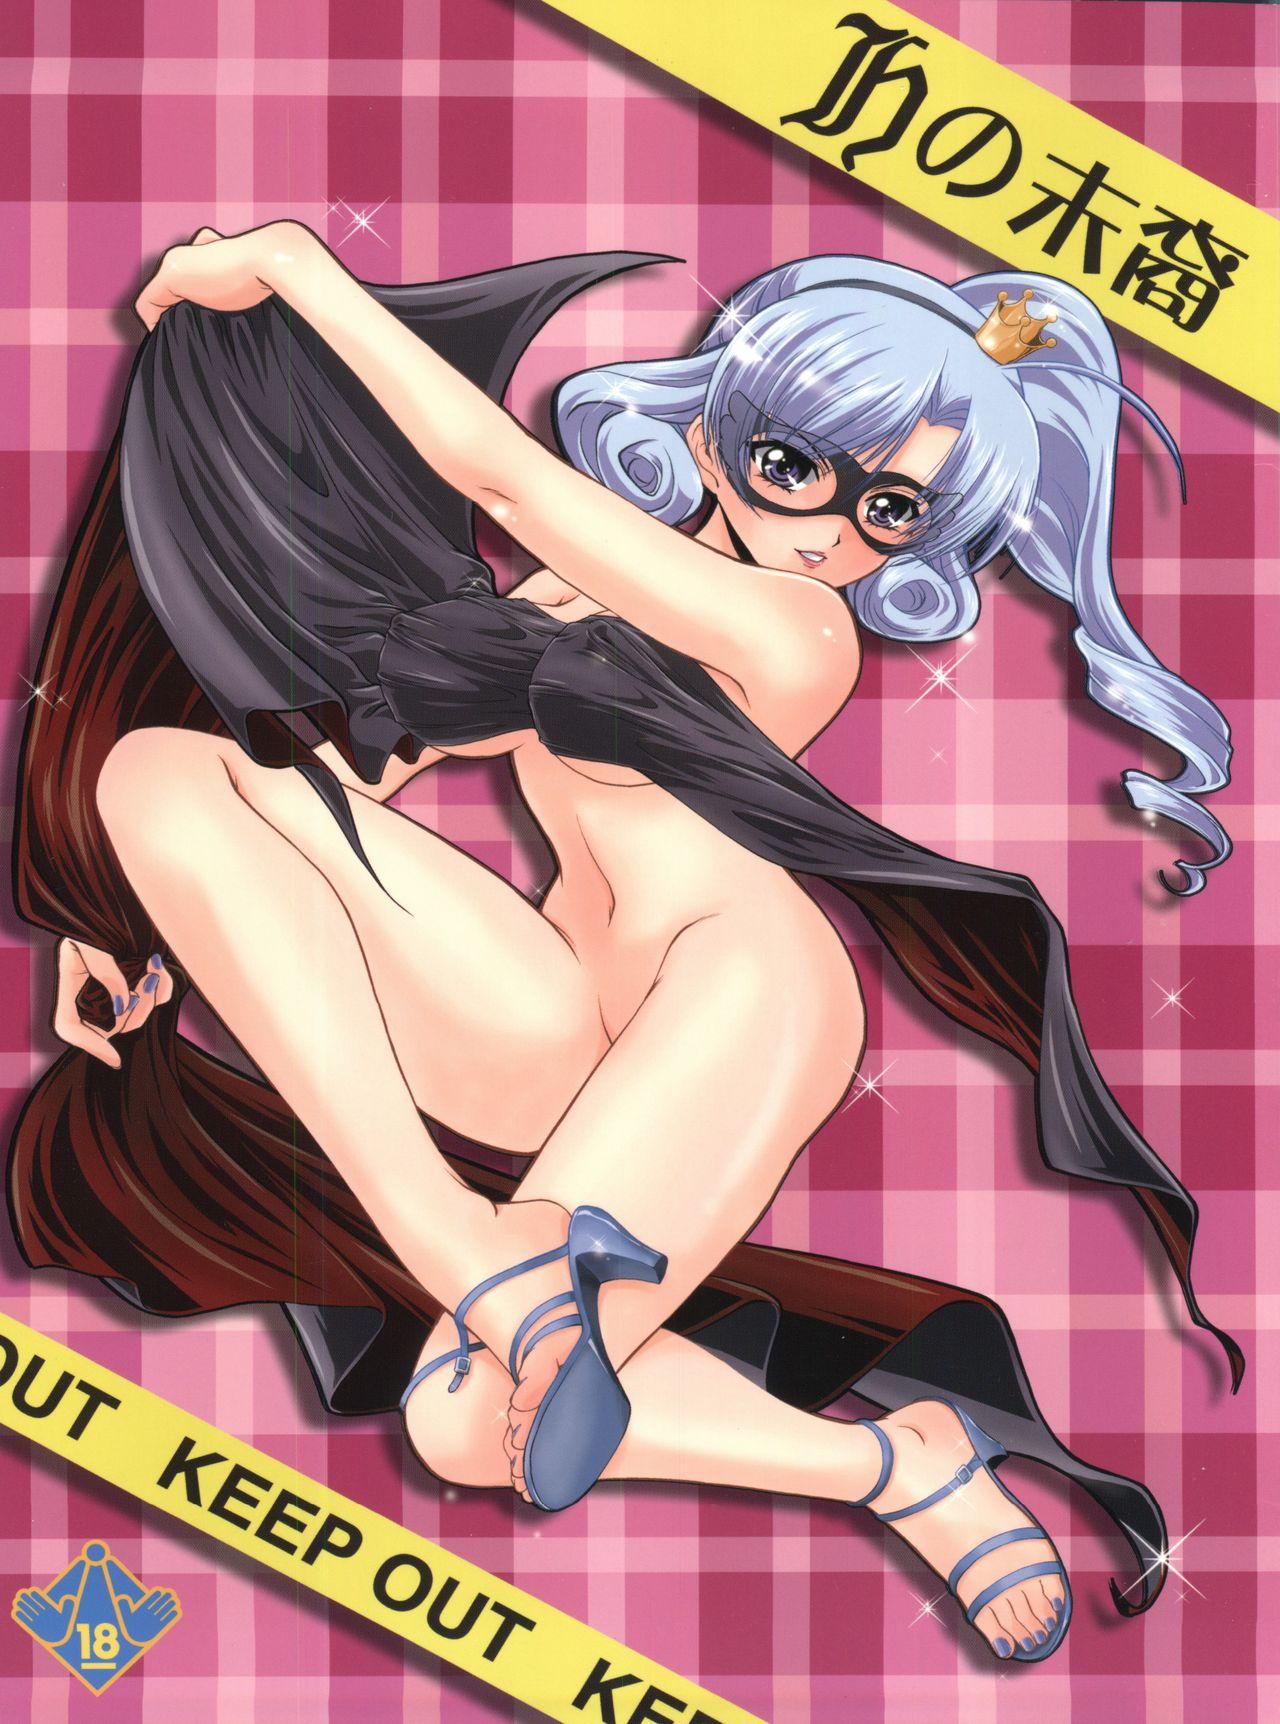 Hot Naked Women H no Matsuei - Tantei opera milky holmes French - Picture 1